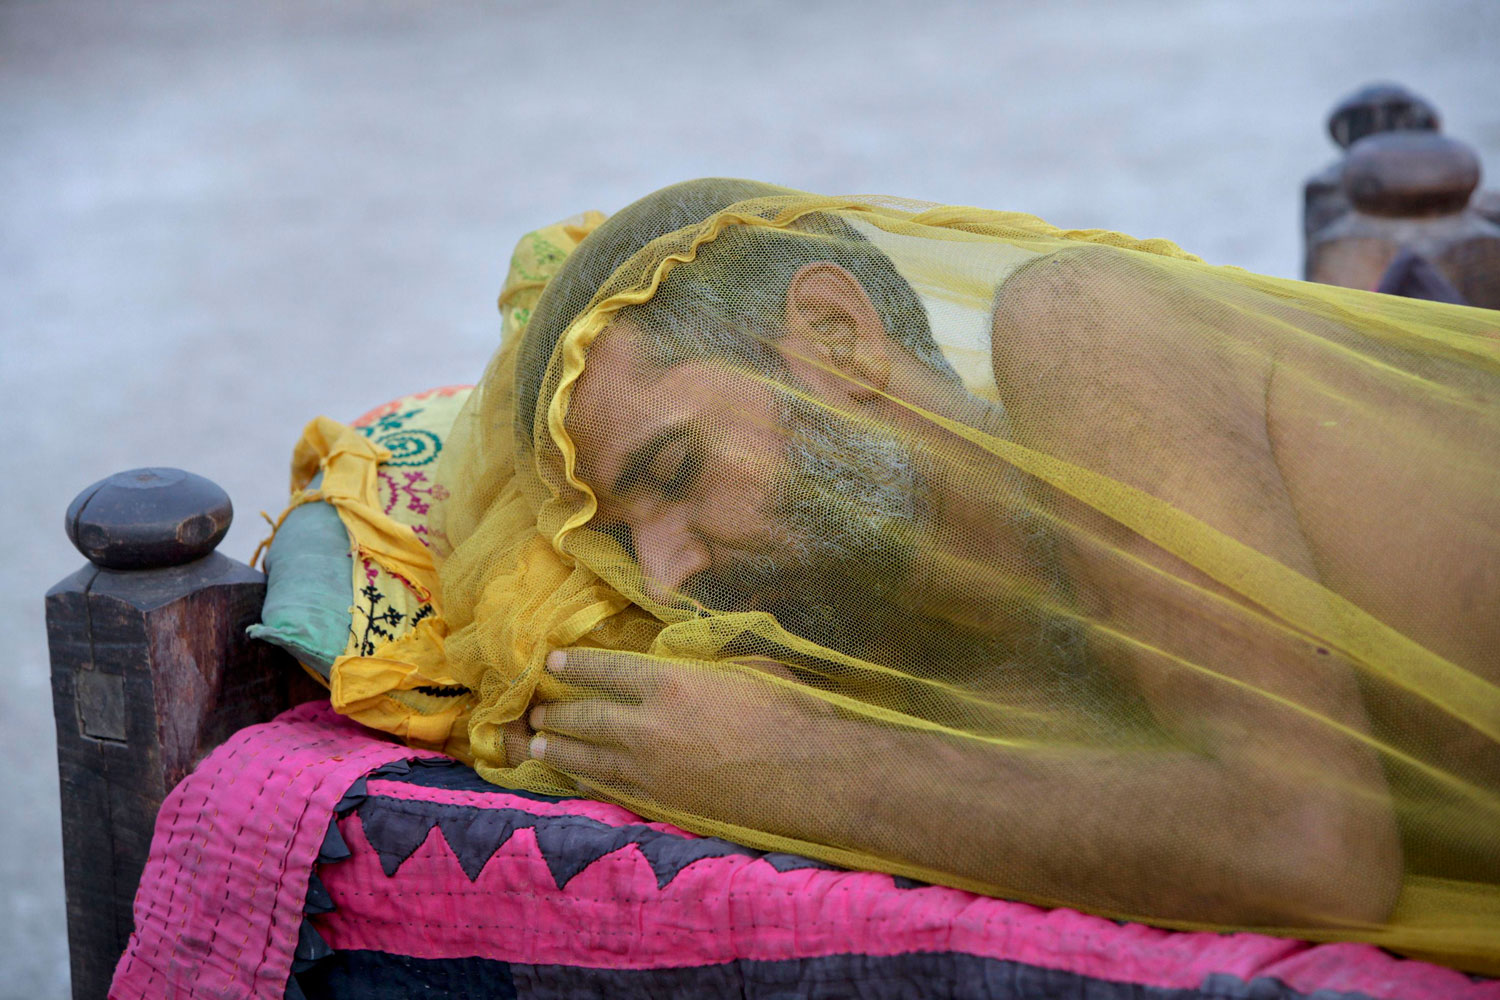 July 12, 2011. A man sleeps under an insect net in a camp for victims of floods in Sukkur, Pakistan. He has been homeless for almost a year. 5 million people are at risk of being displaced by flooding this year, following poor reconstruction after the historic 2010 disaster.